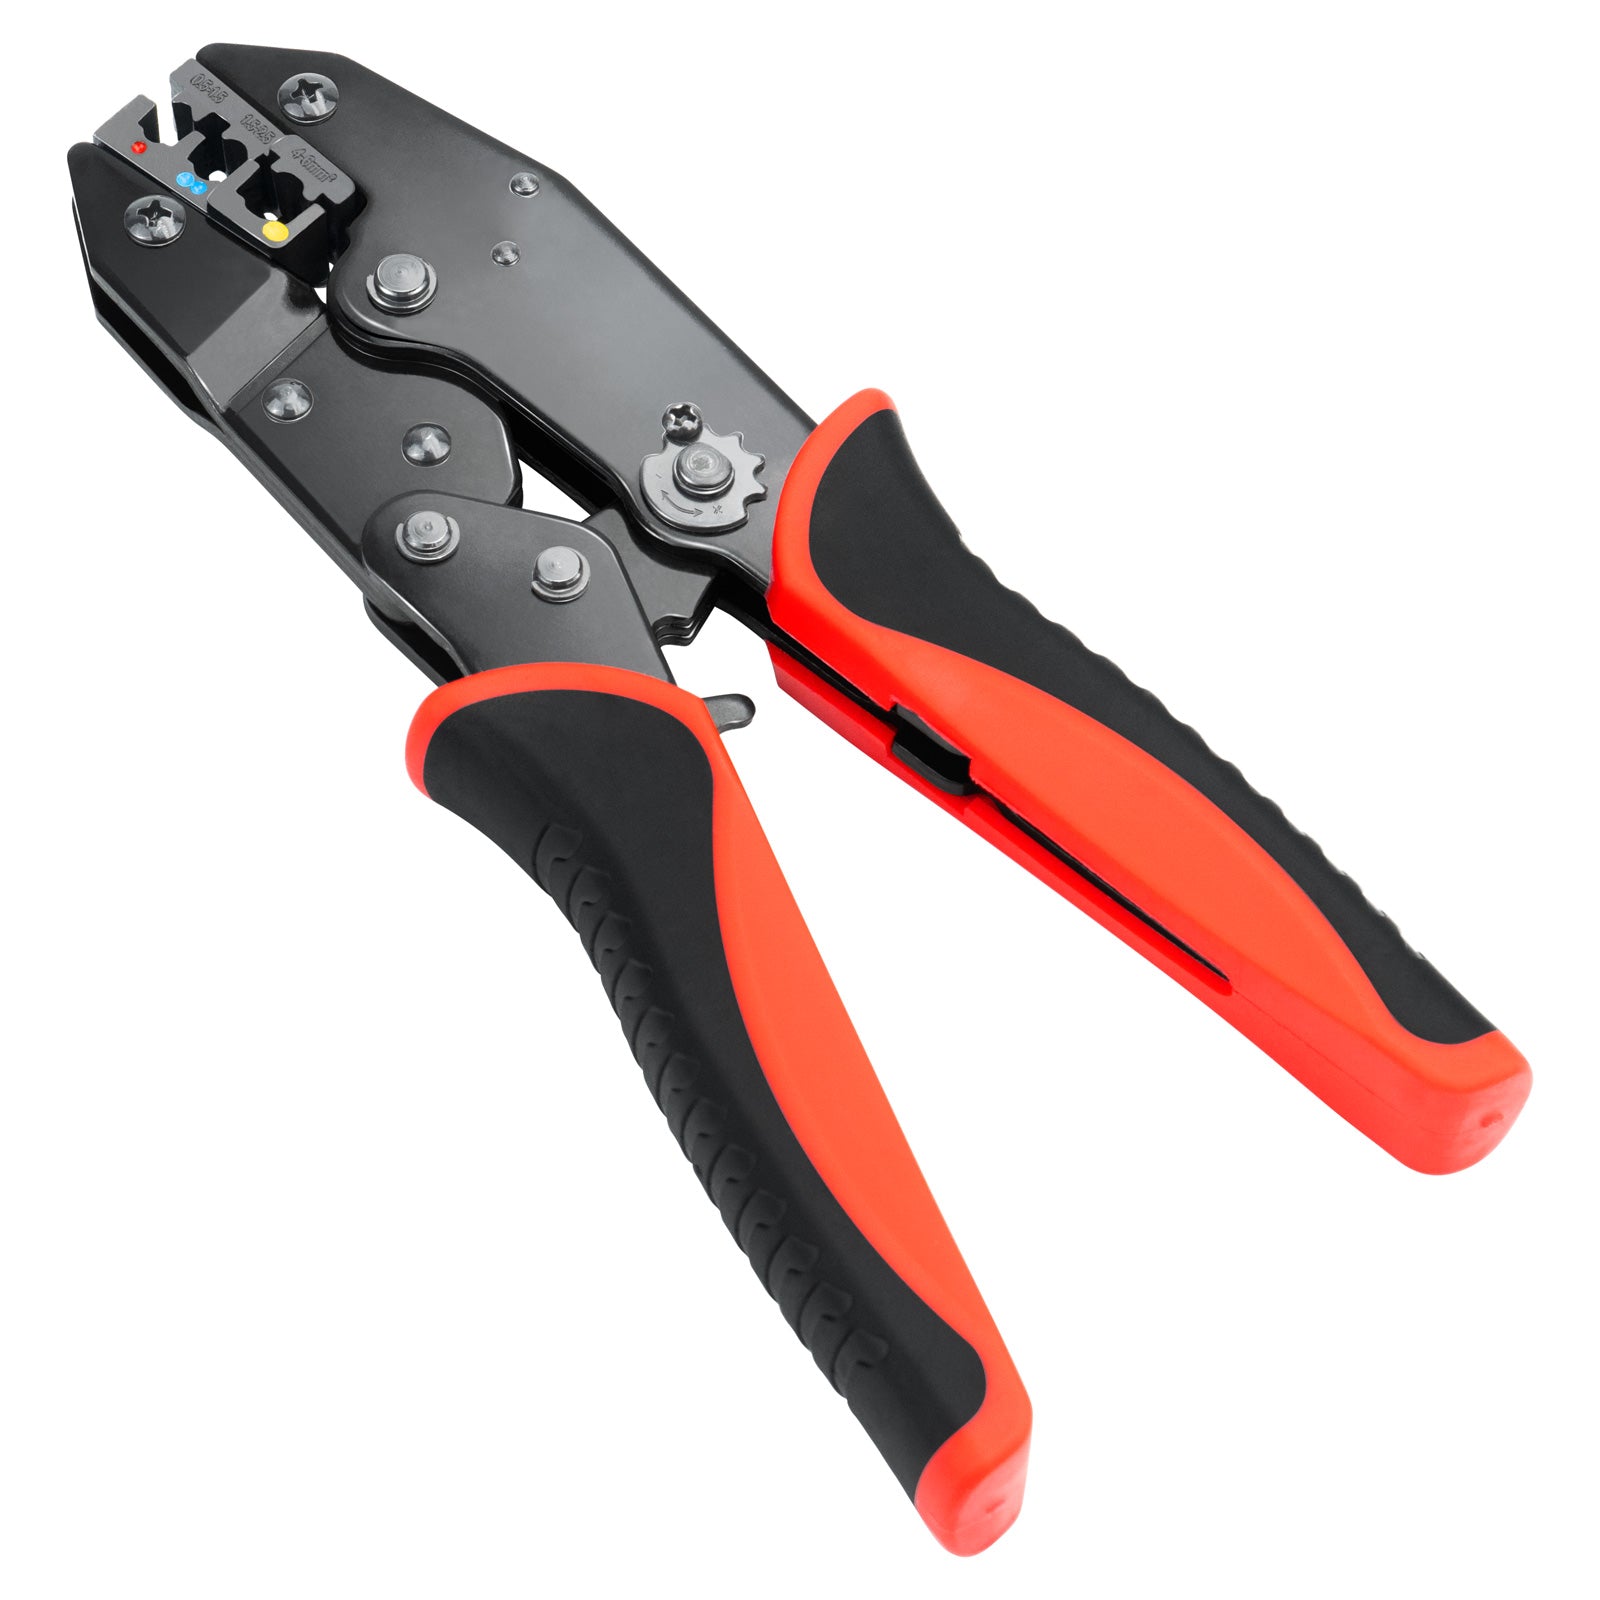 wire crimping tool for Insulated wire terminal connectors – sanuketools